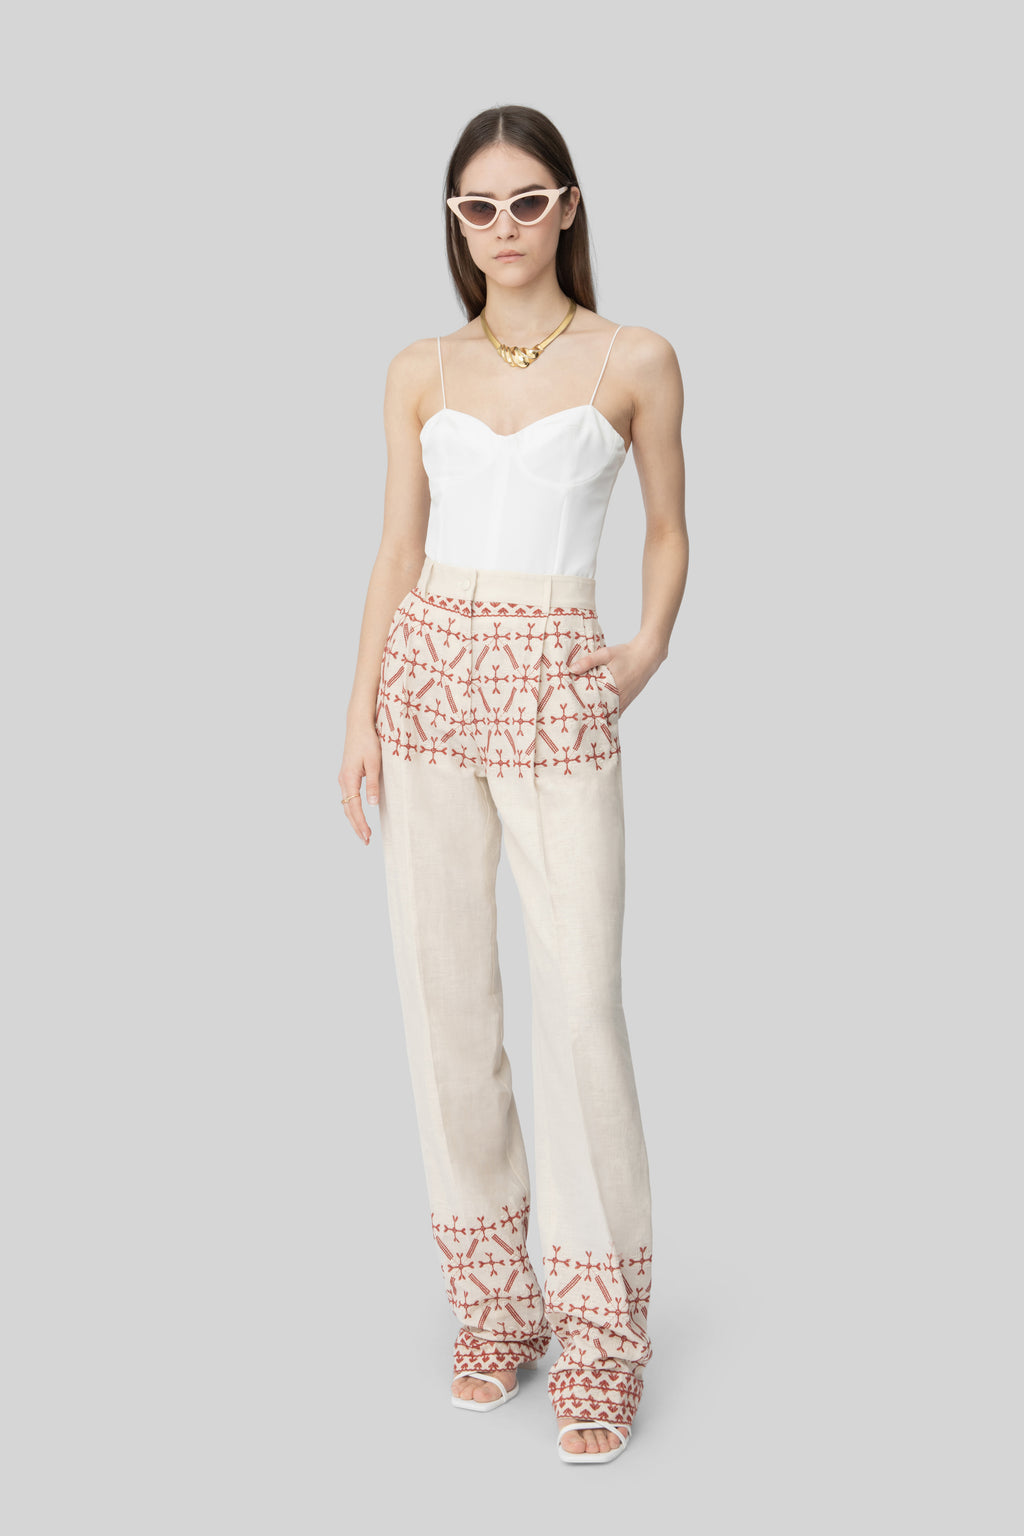 The Cream & Red Embroidered Linen Diane Pants